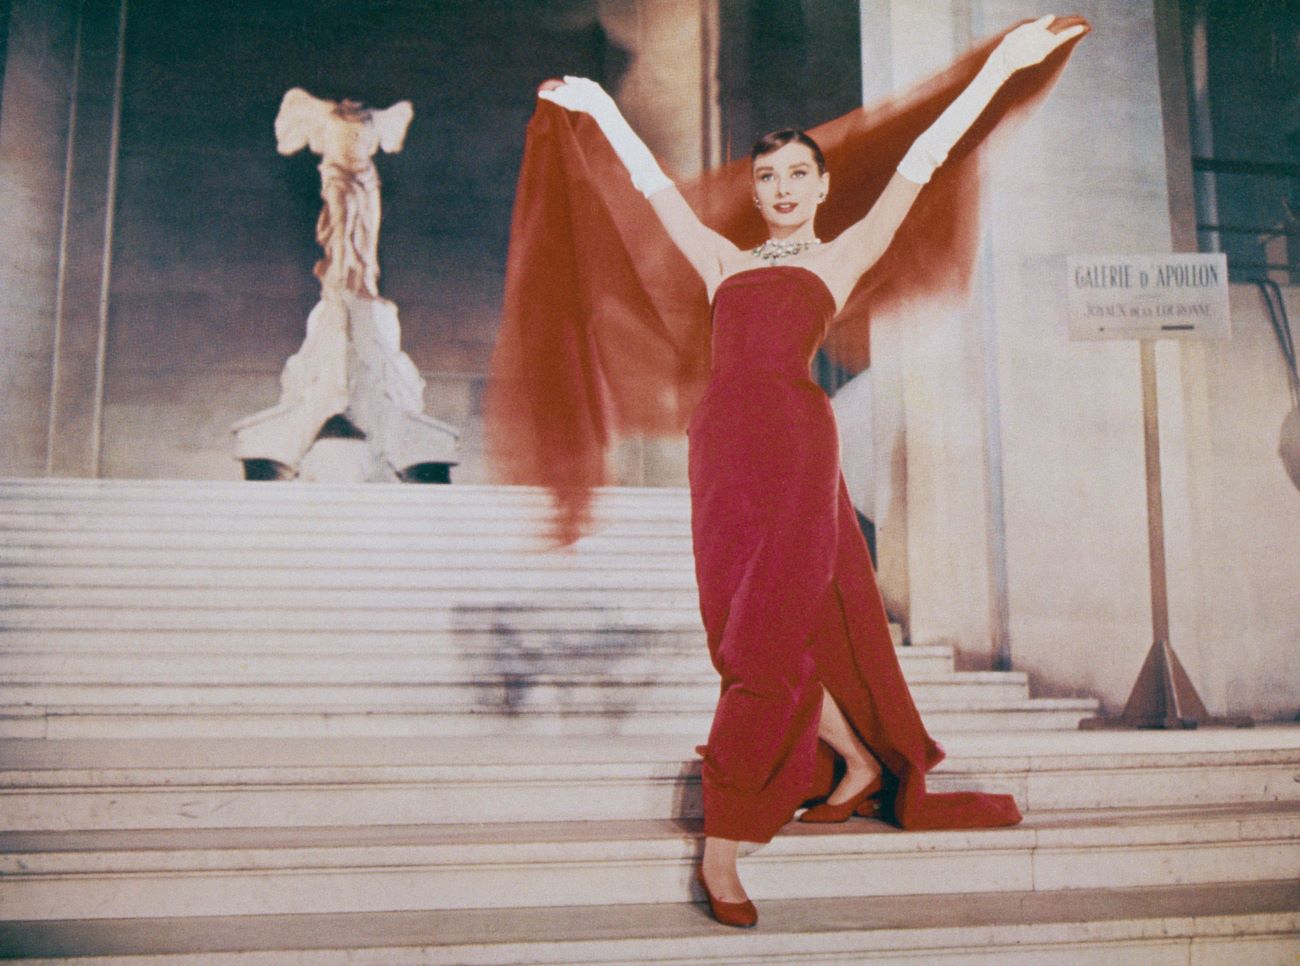 Audrey Hepburn wears a red dress and descends the stairs. She holds a red scarf above her head.